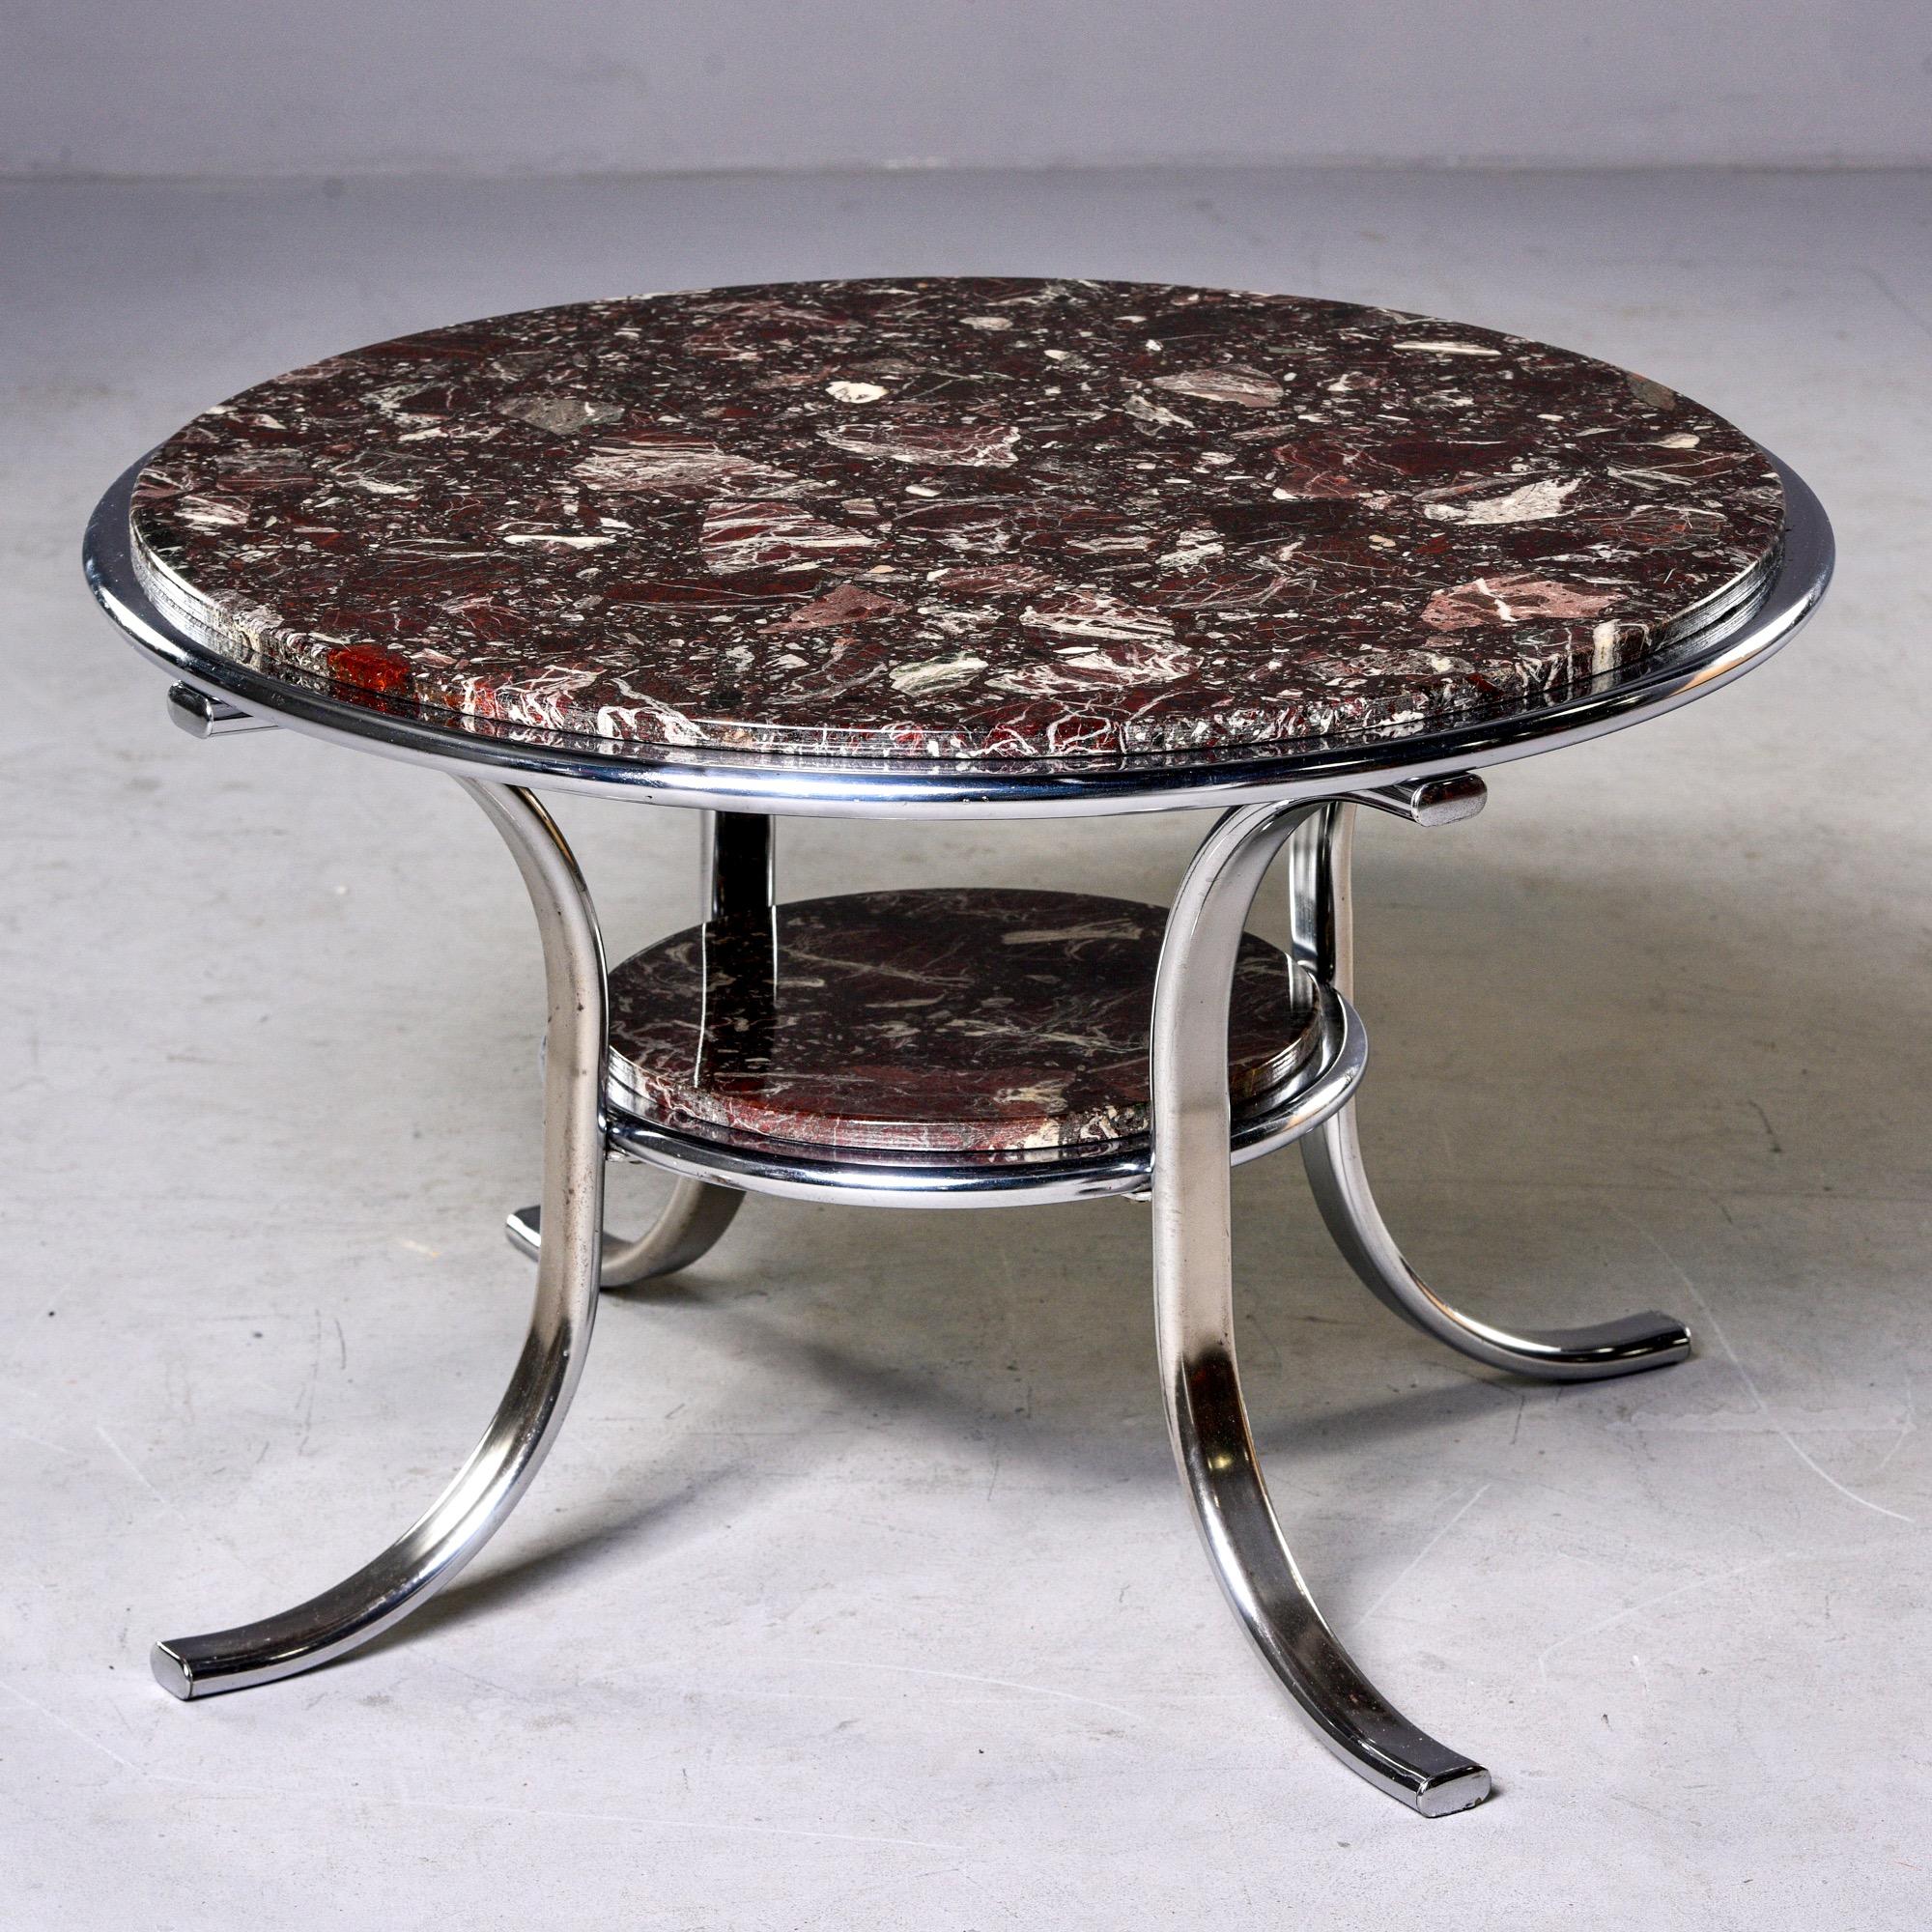 20th Century Midcentury Two-Tier Polished Nickel and Marble Cocktail Table